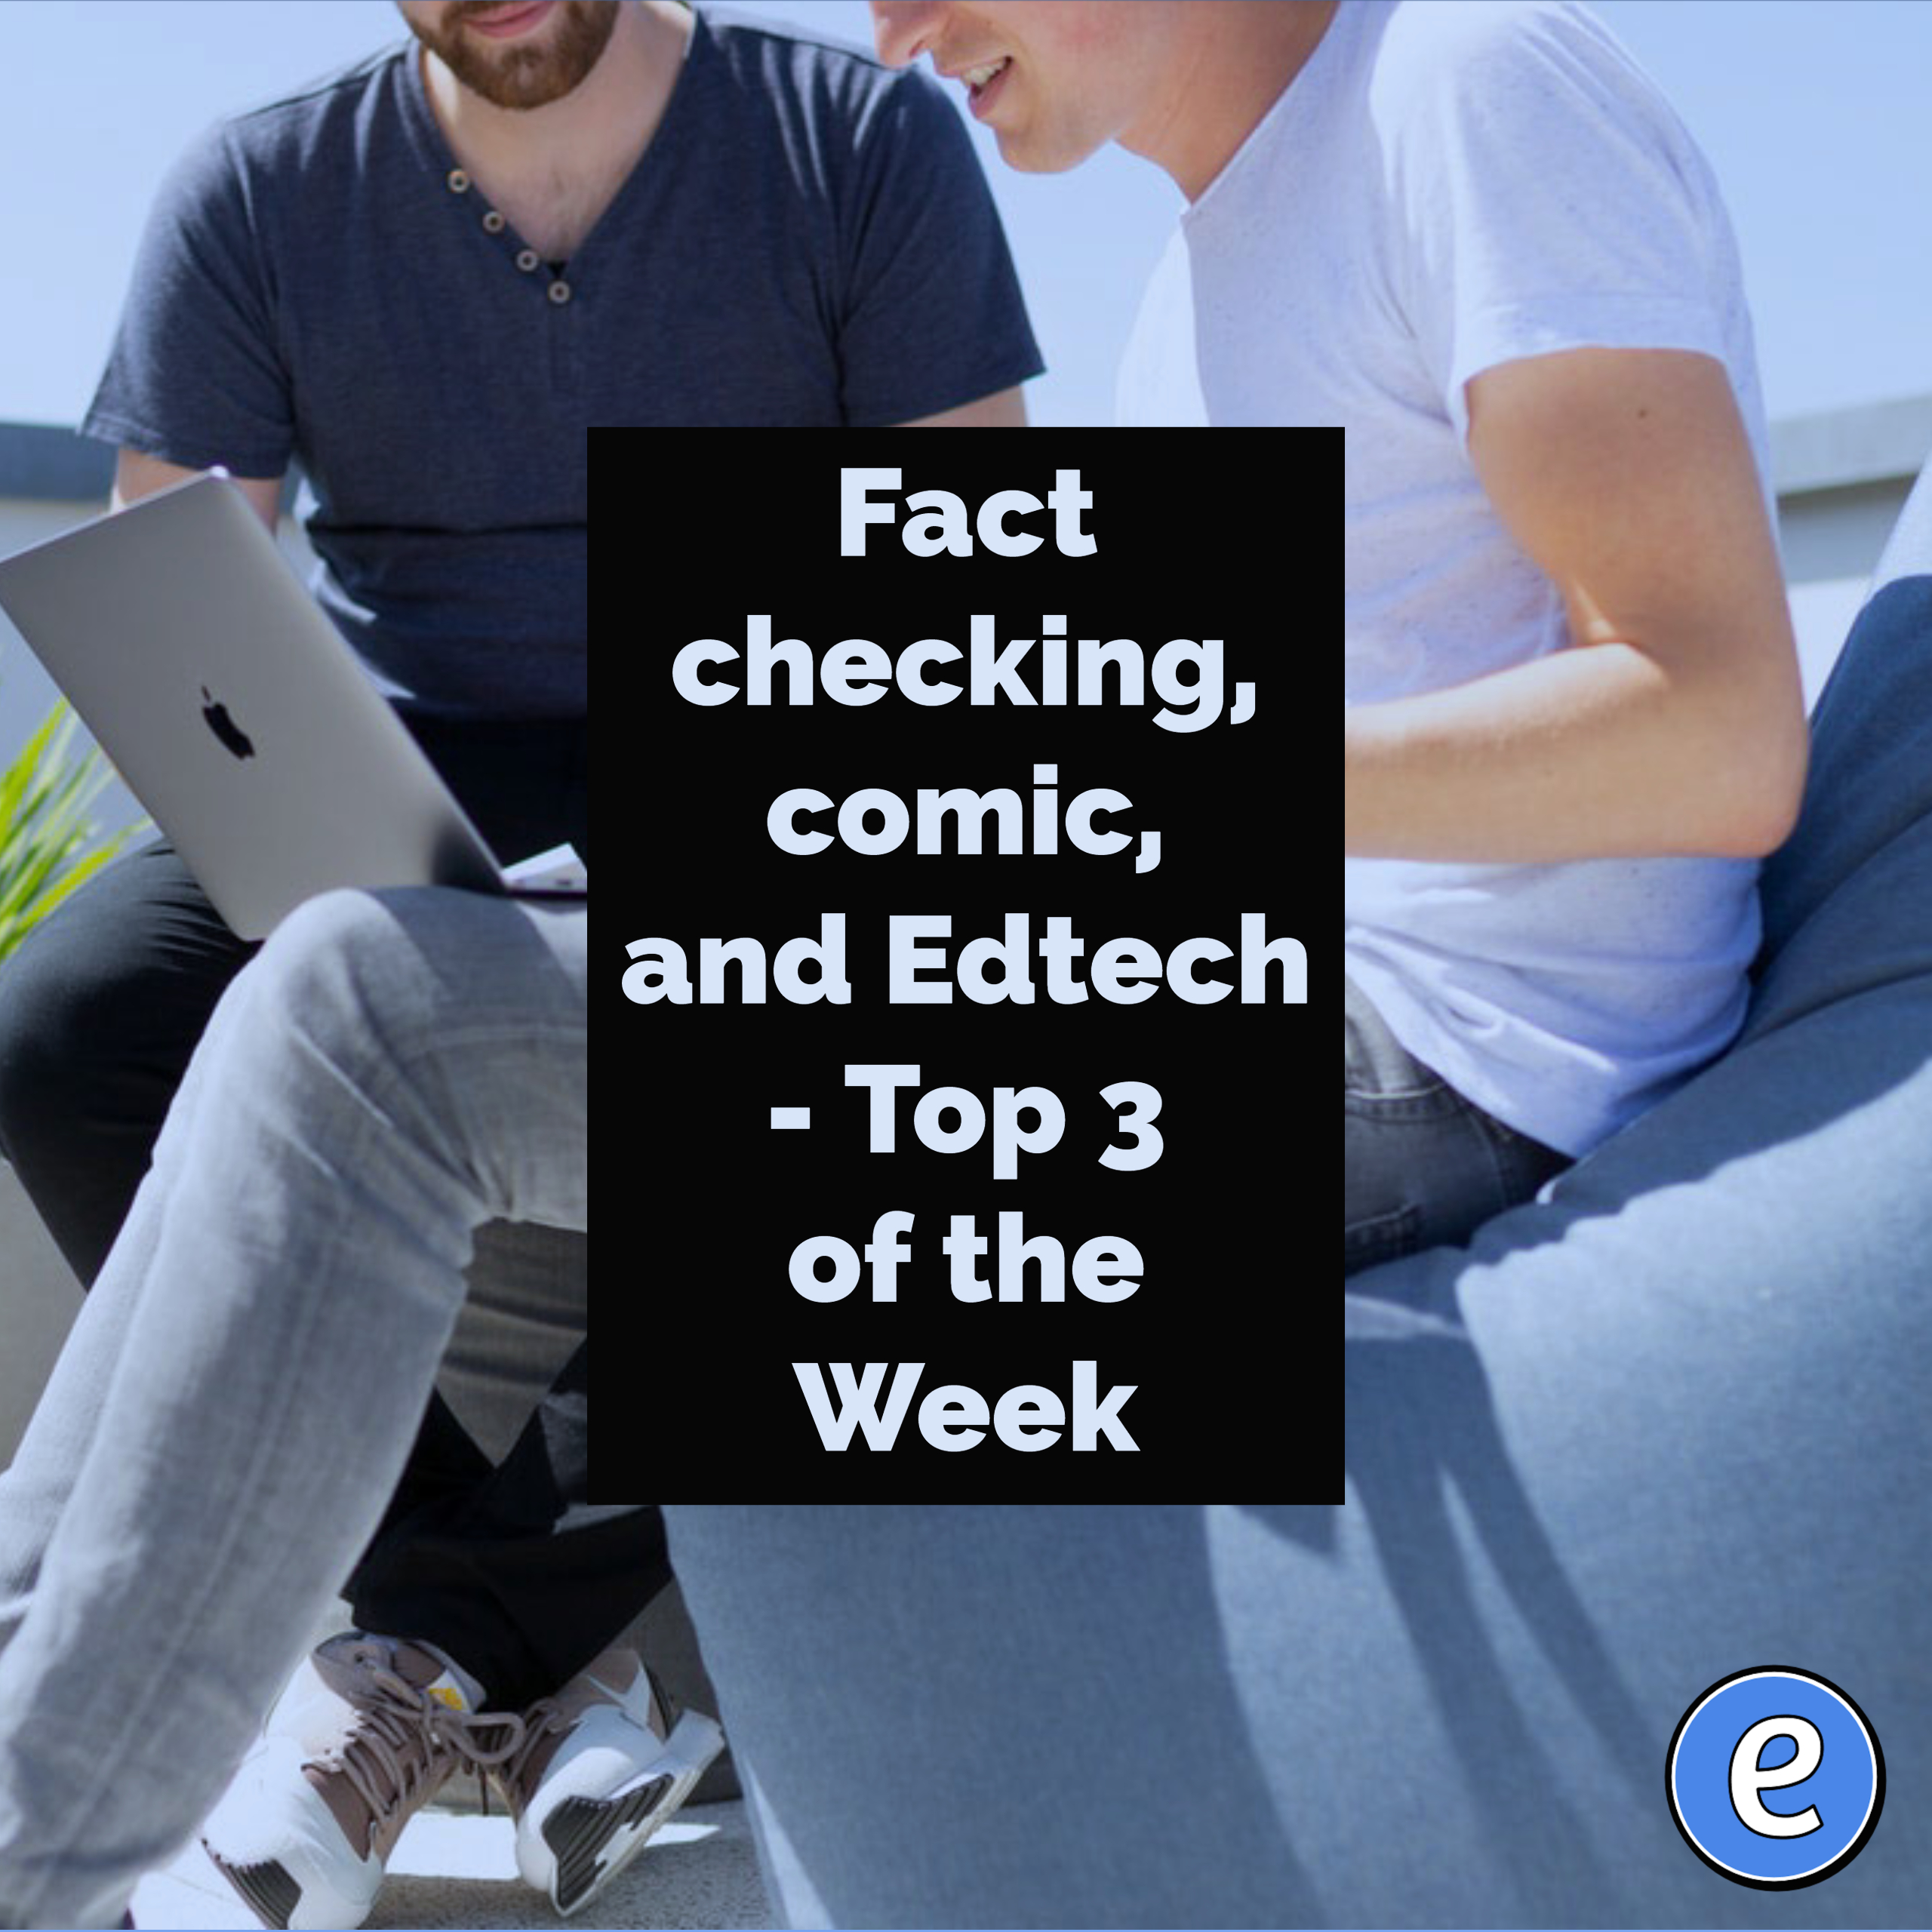 Fact checking, comic, and Edtech – Top 3 of the Week